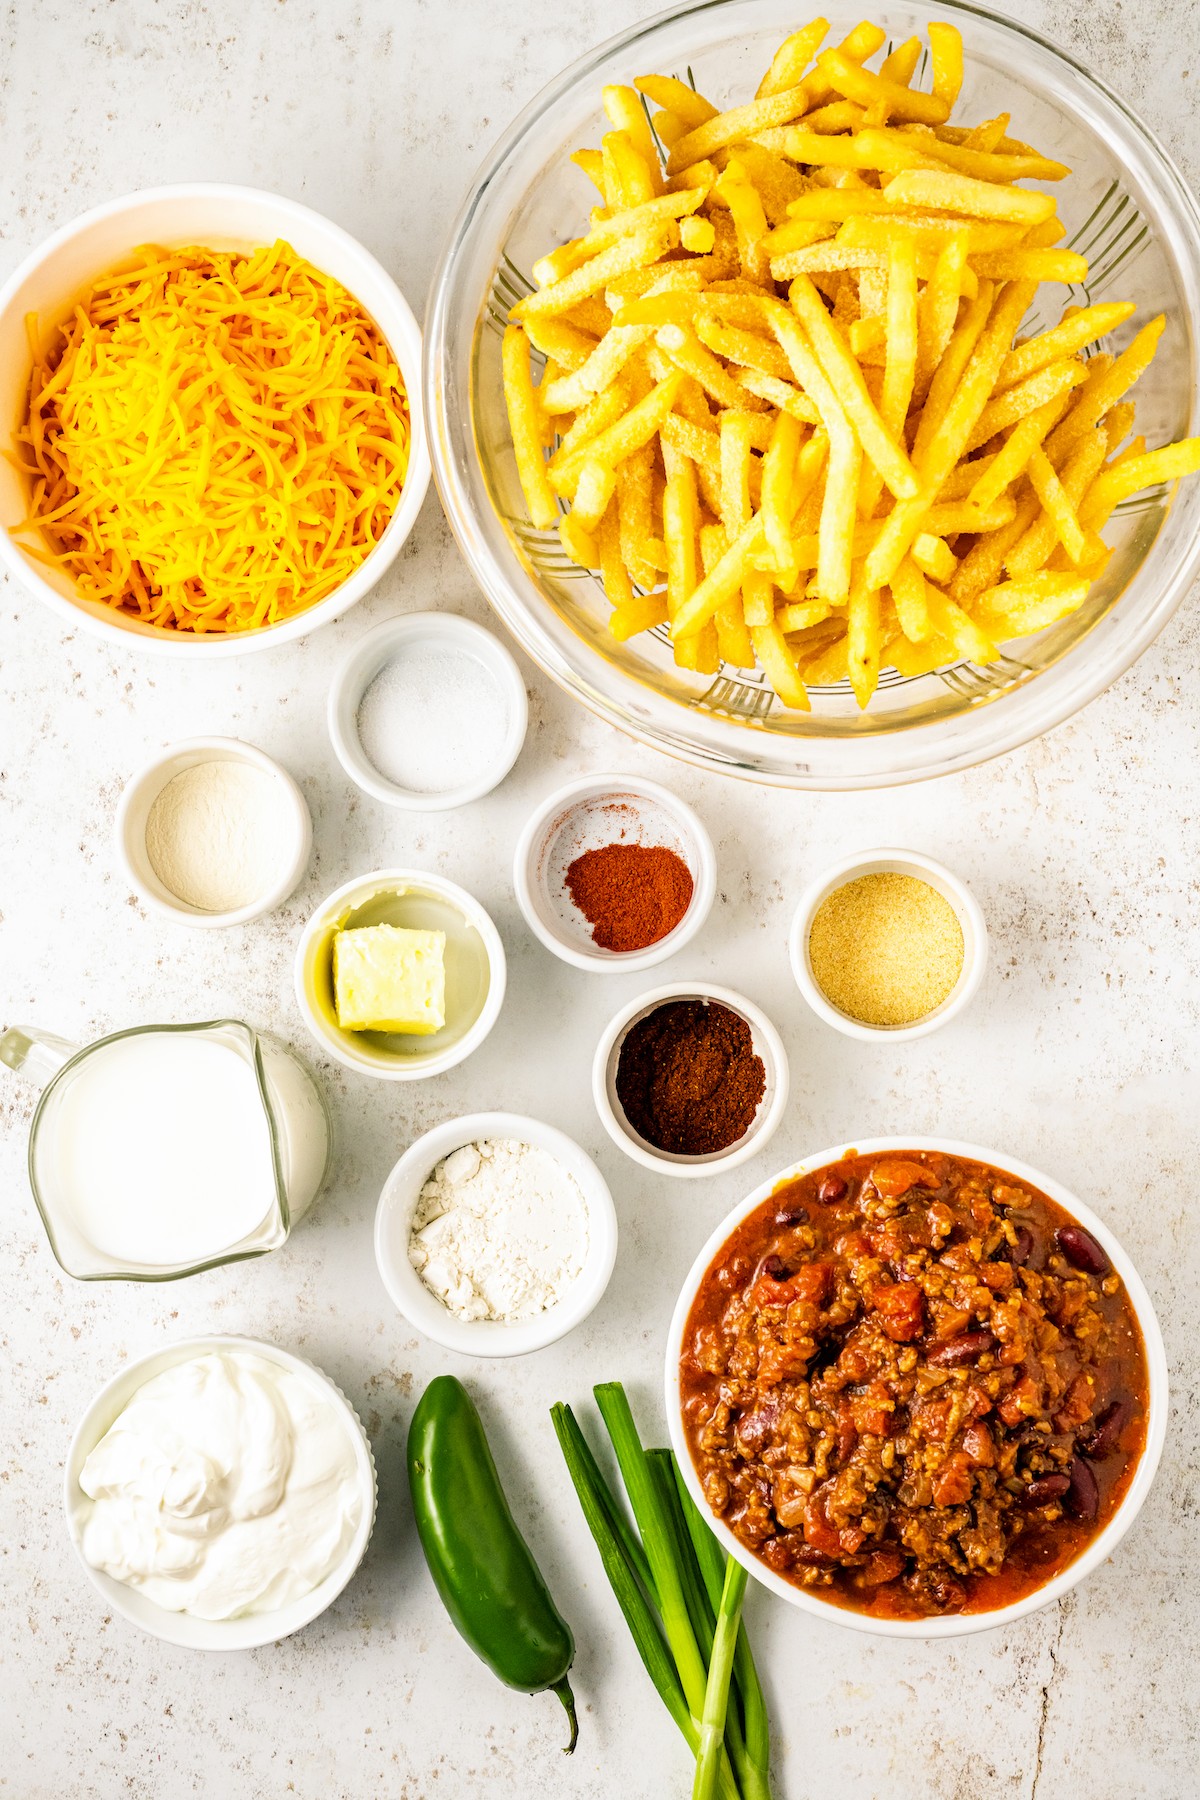 Ingredients for chili cheese fries, measured and arranged on a work surface.